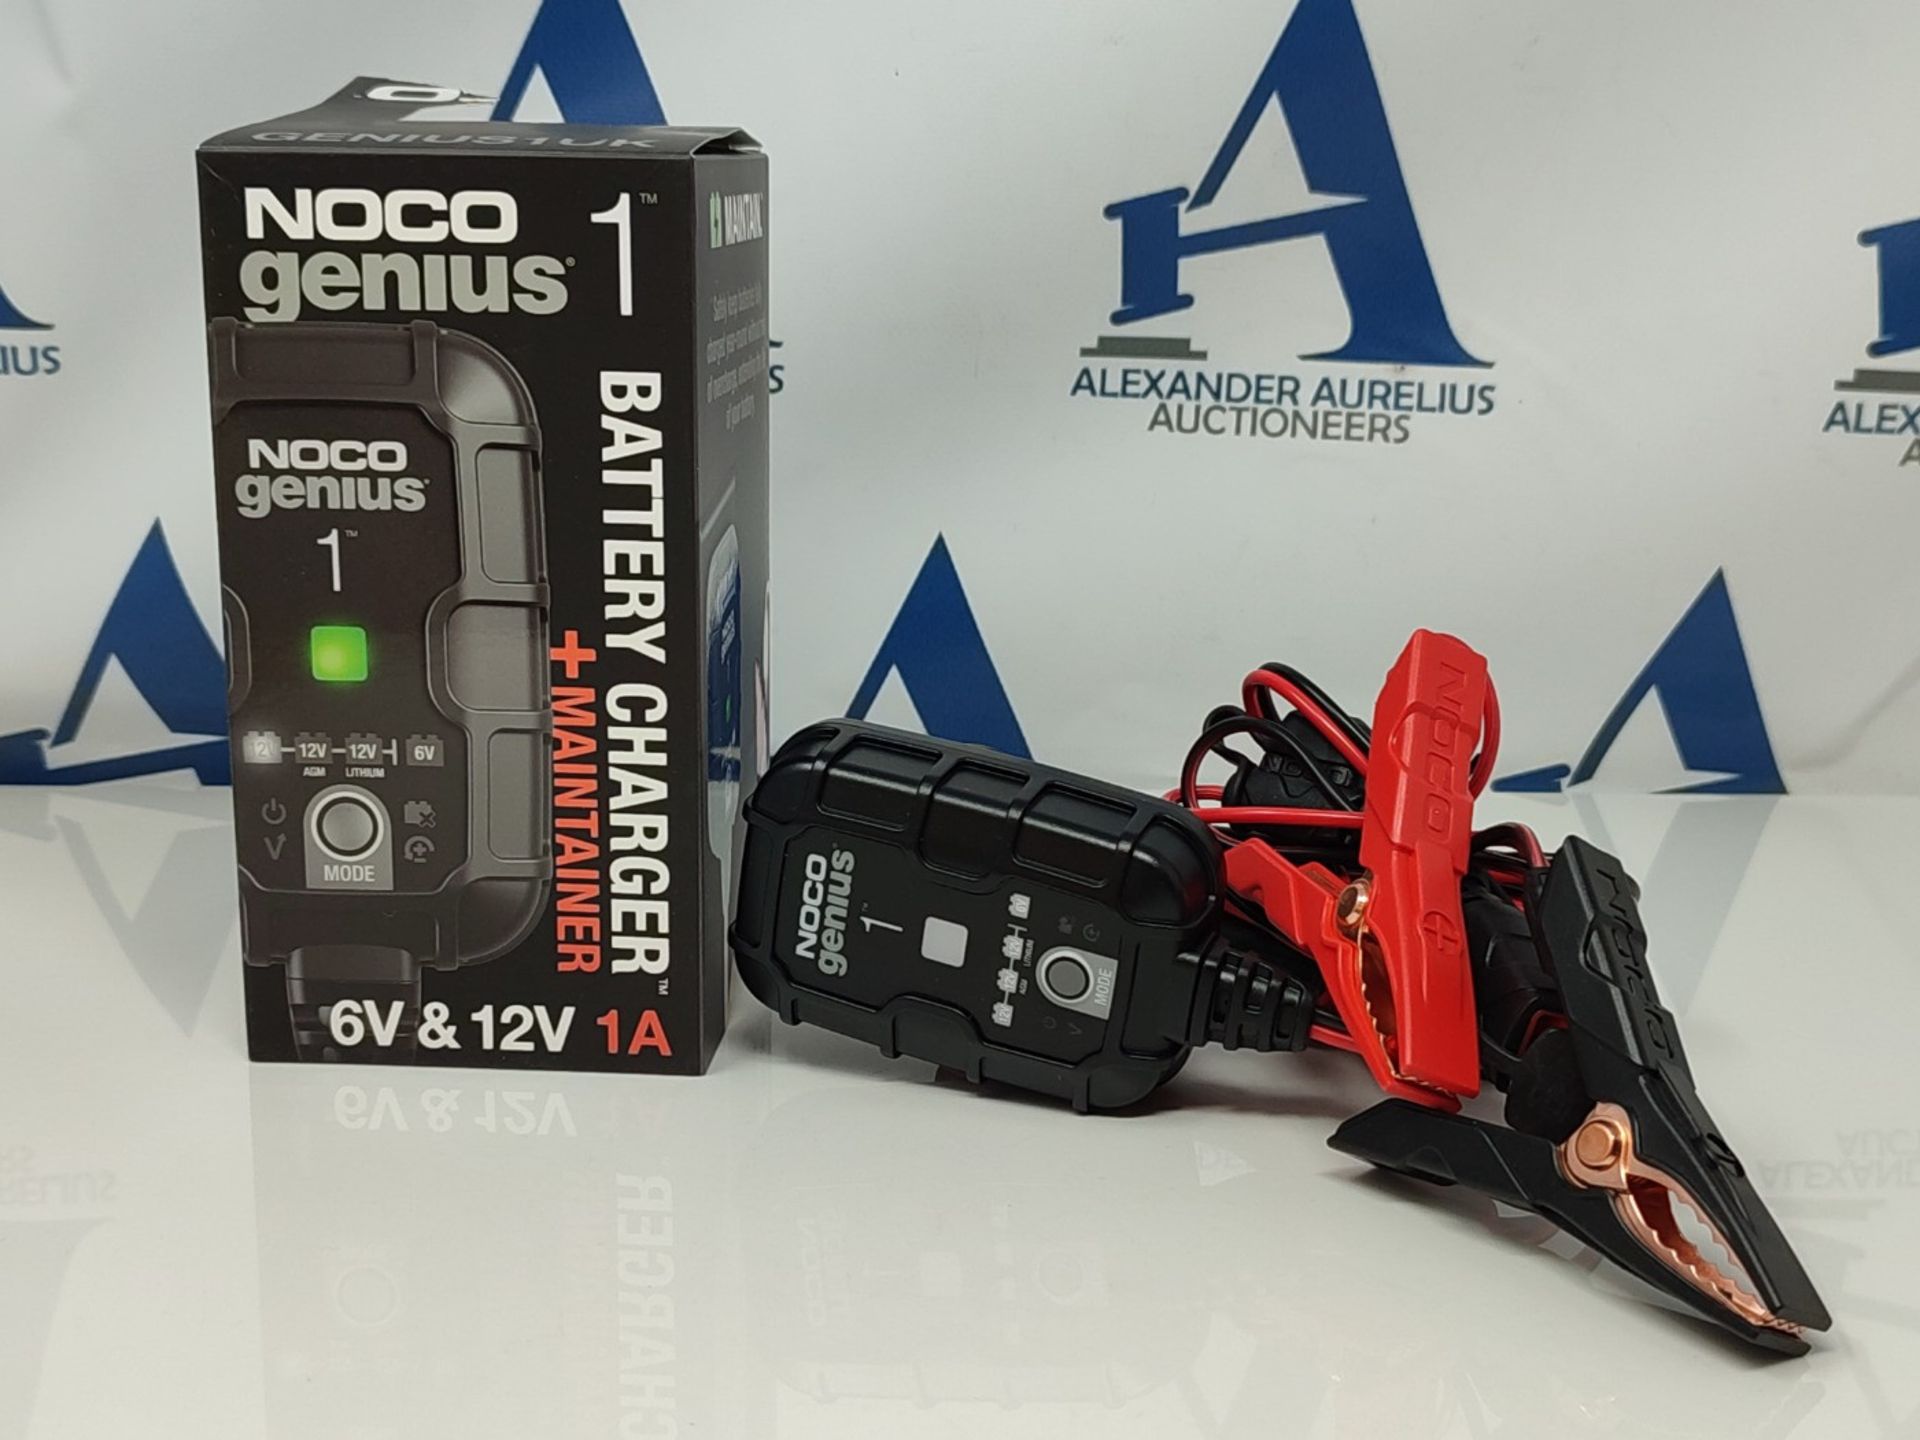 NOCO GENIUS1UK, 1A Car Battery Charger, 6V and 12V Portable Smart Charger, Battery Mai - Image 3 of 3